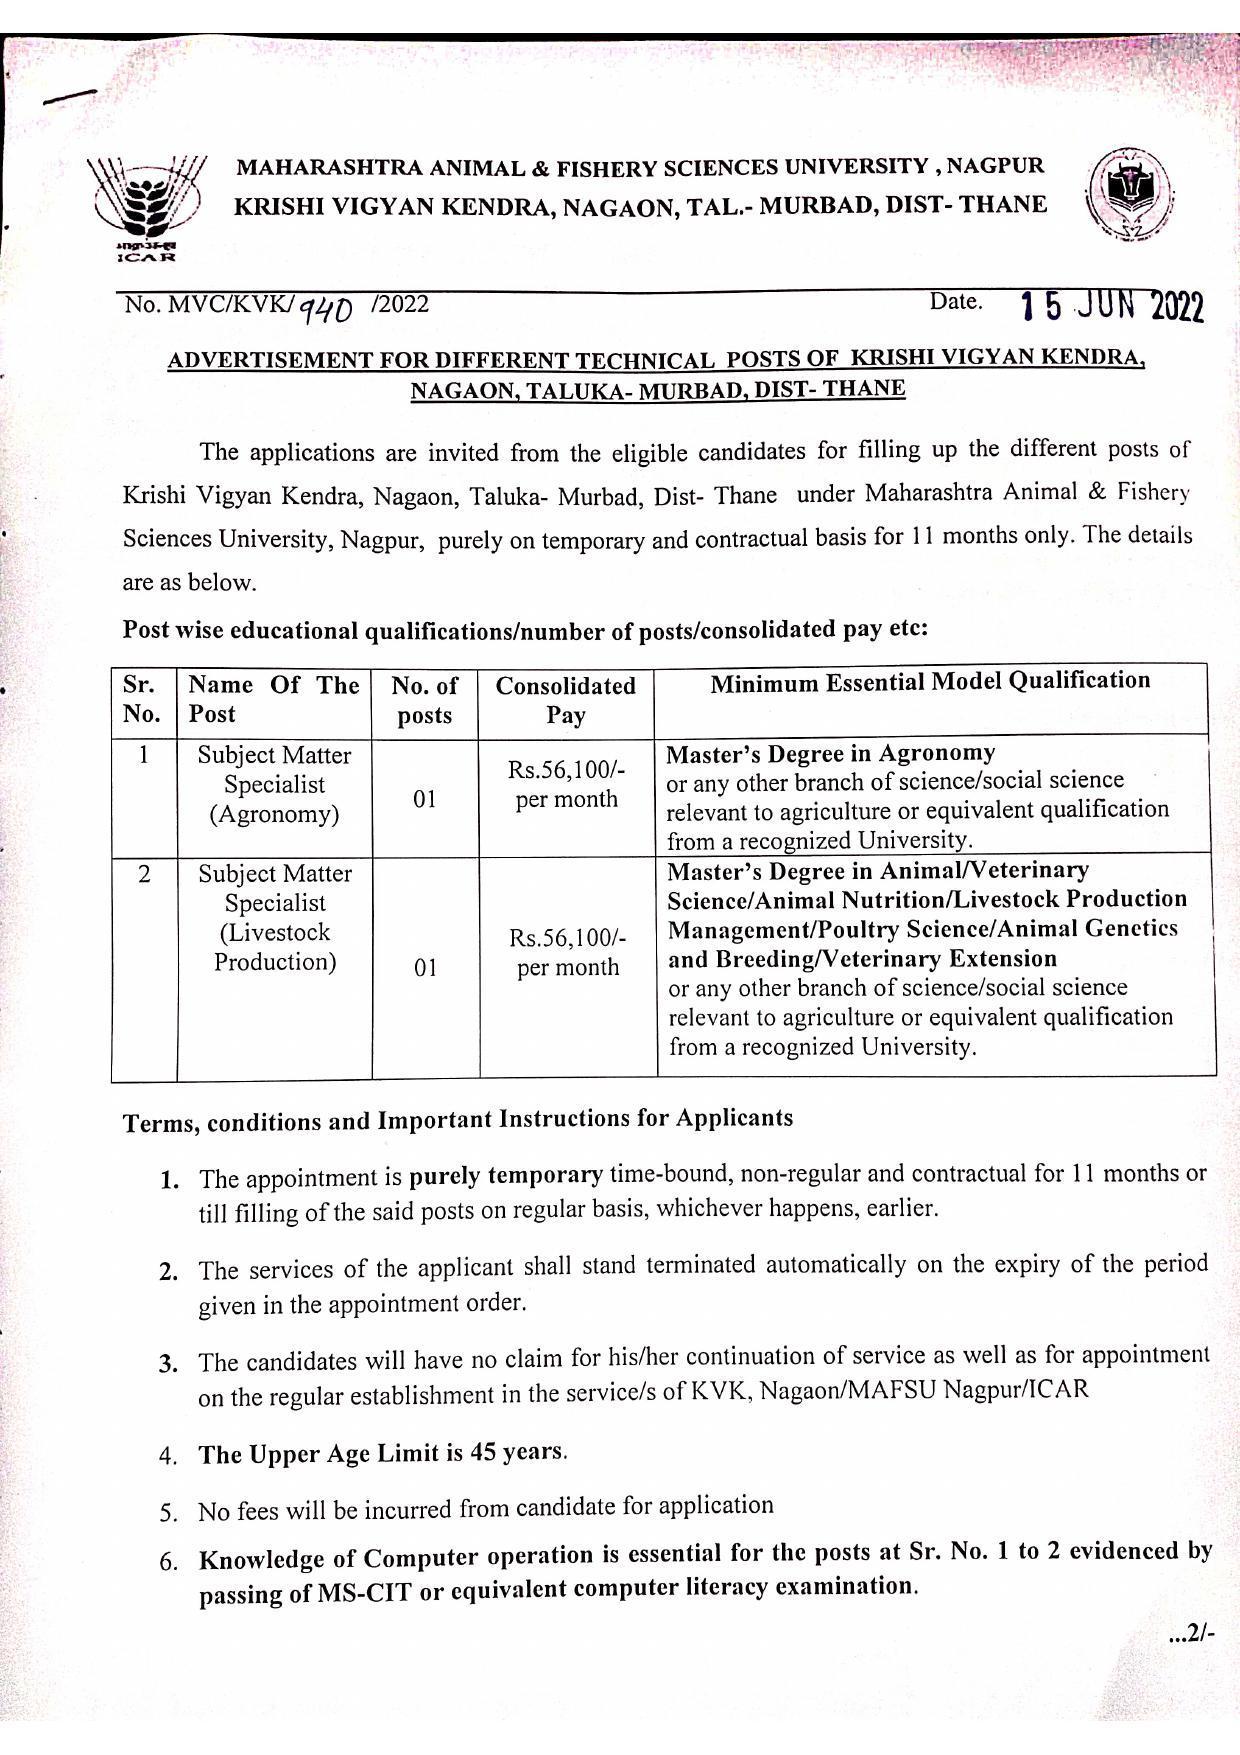 MAFSU Recruitment 2022 for Subject Matter Specialist - Page 5